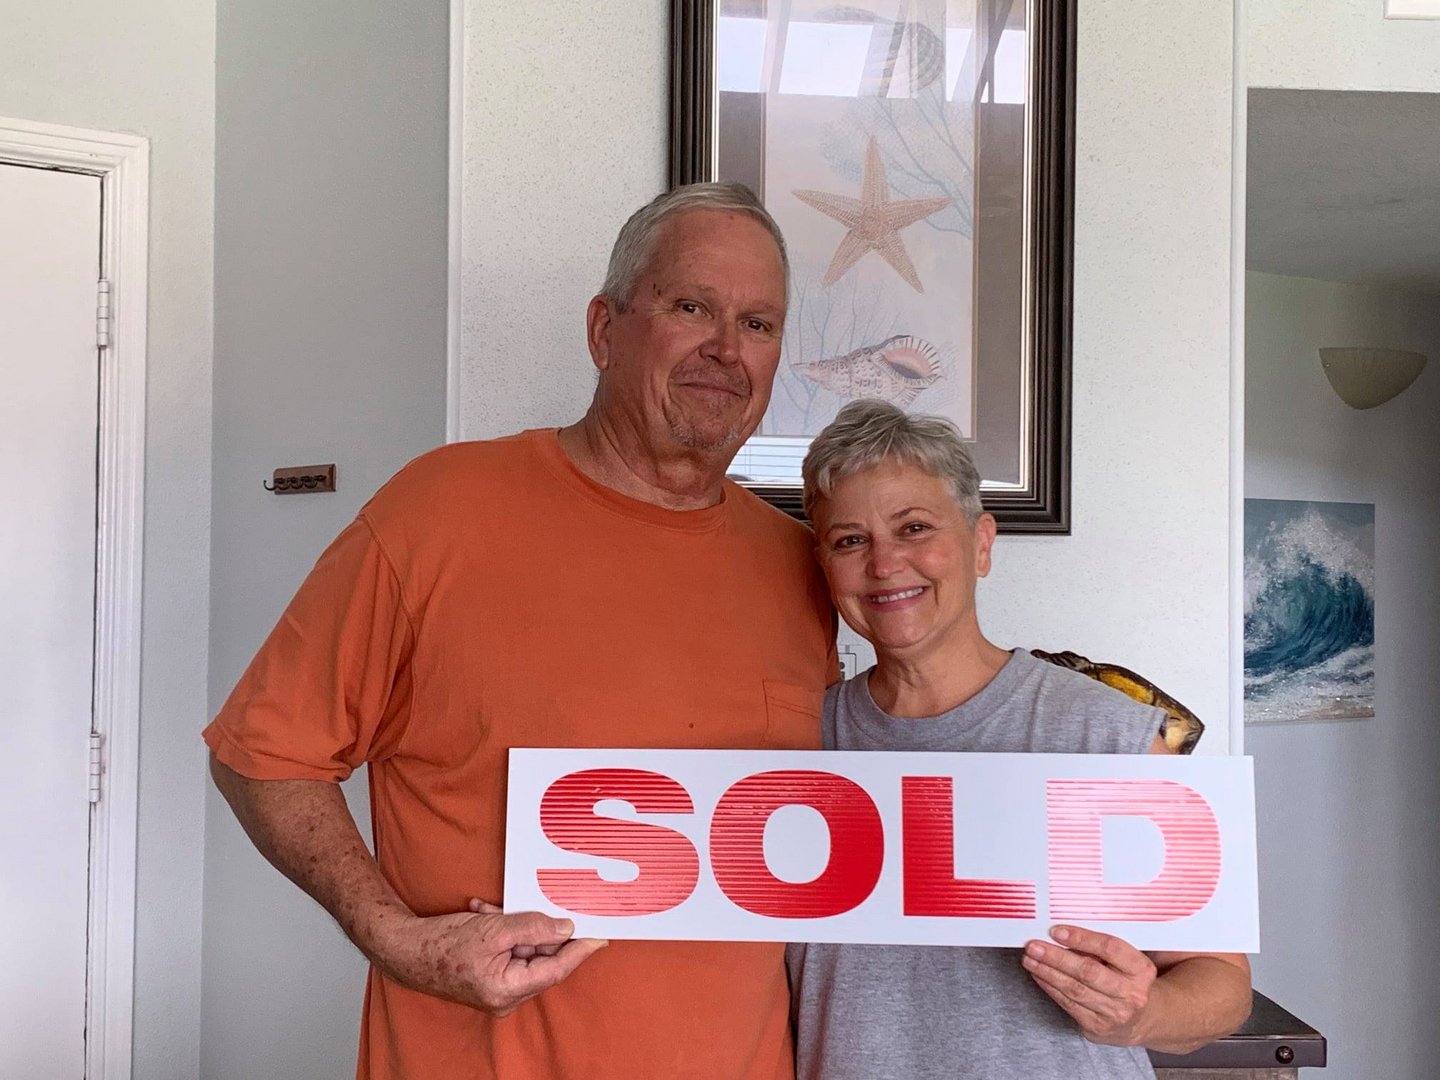  Dina was SUPER knowledgeable, professional and helpful in EVERY way!! Every time we needed info you were there for us in an instant!! Thank you for helping make our beach dream come true! We count you as a friend now and not just our realtor! You ma